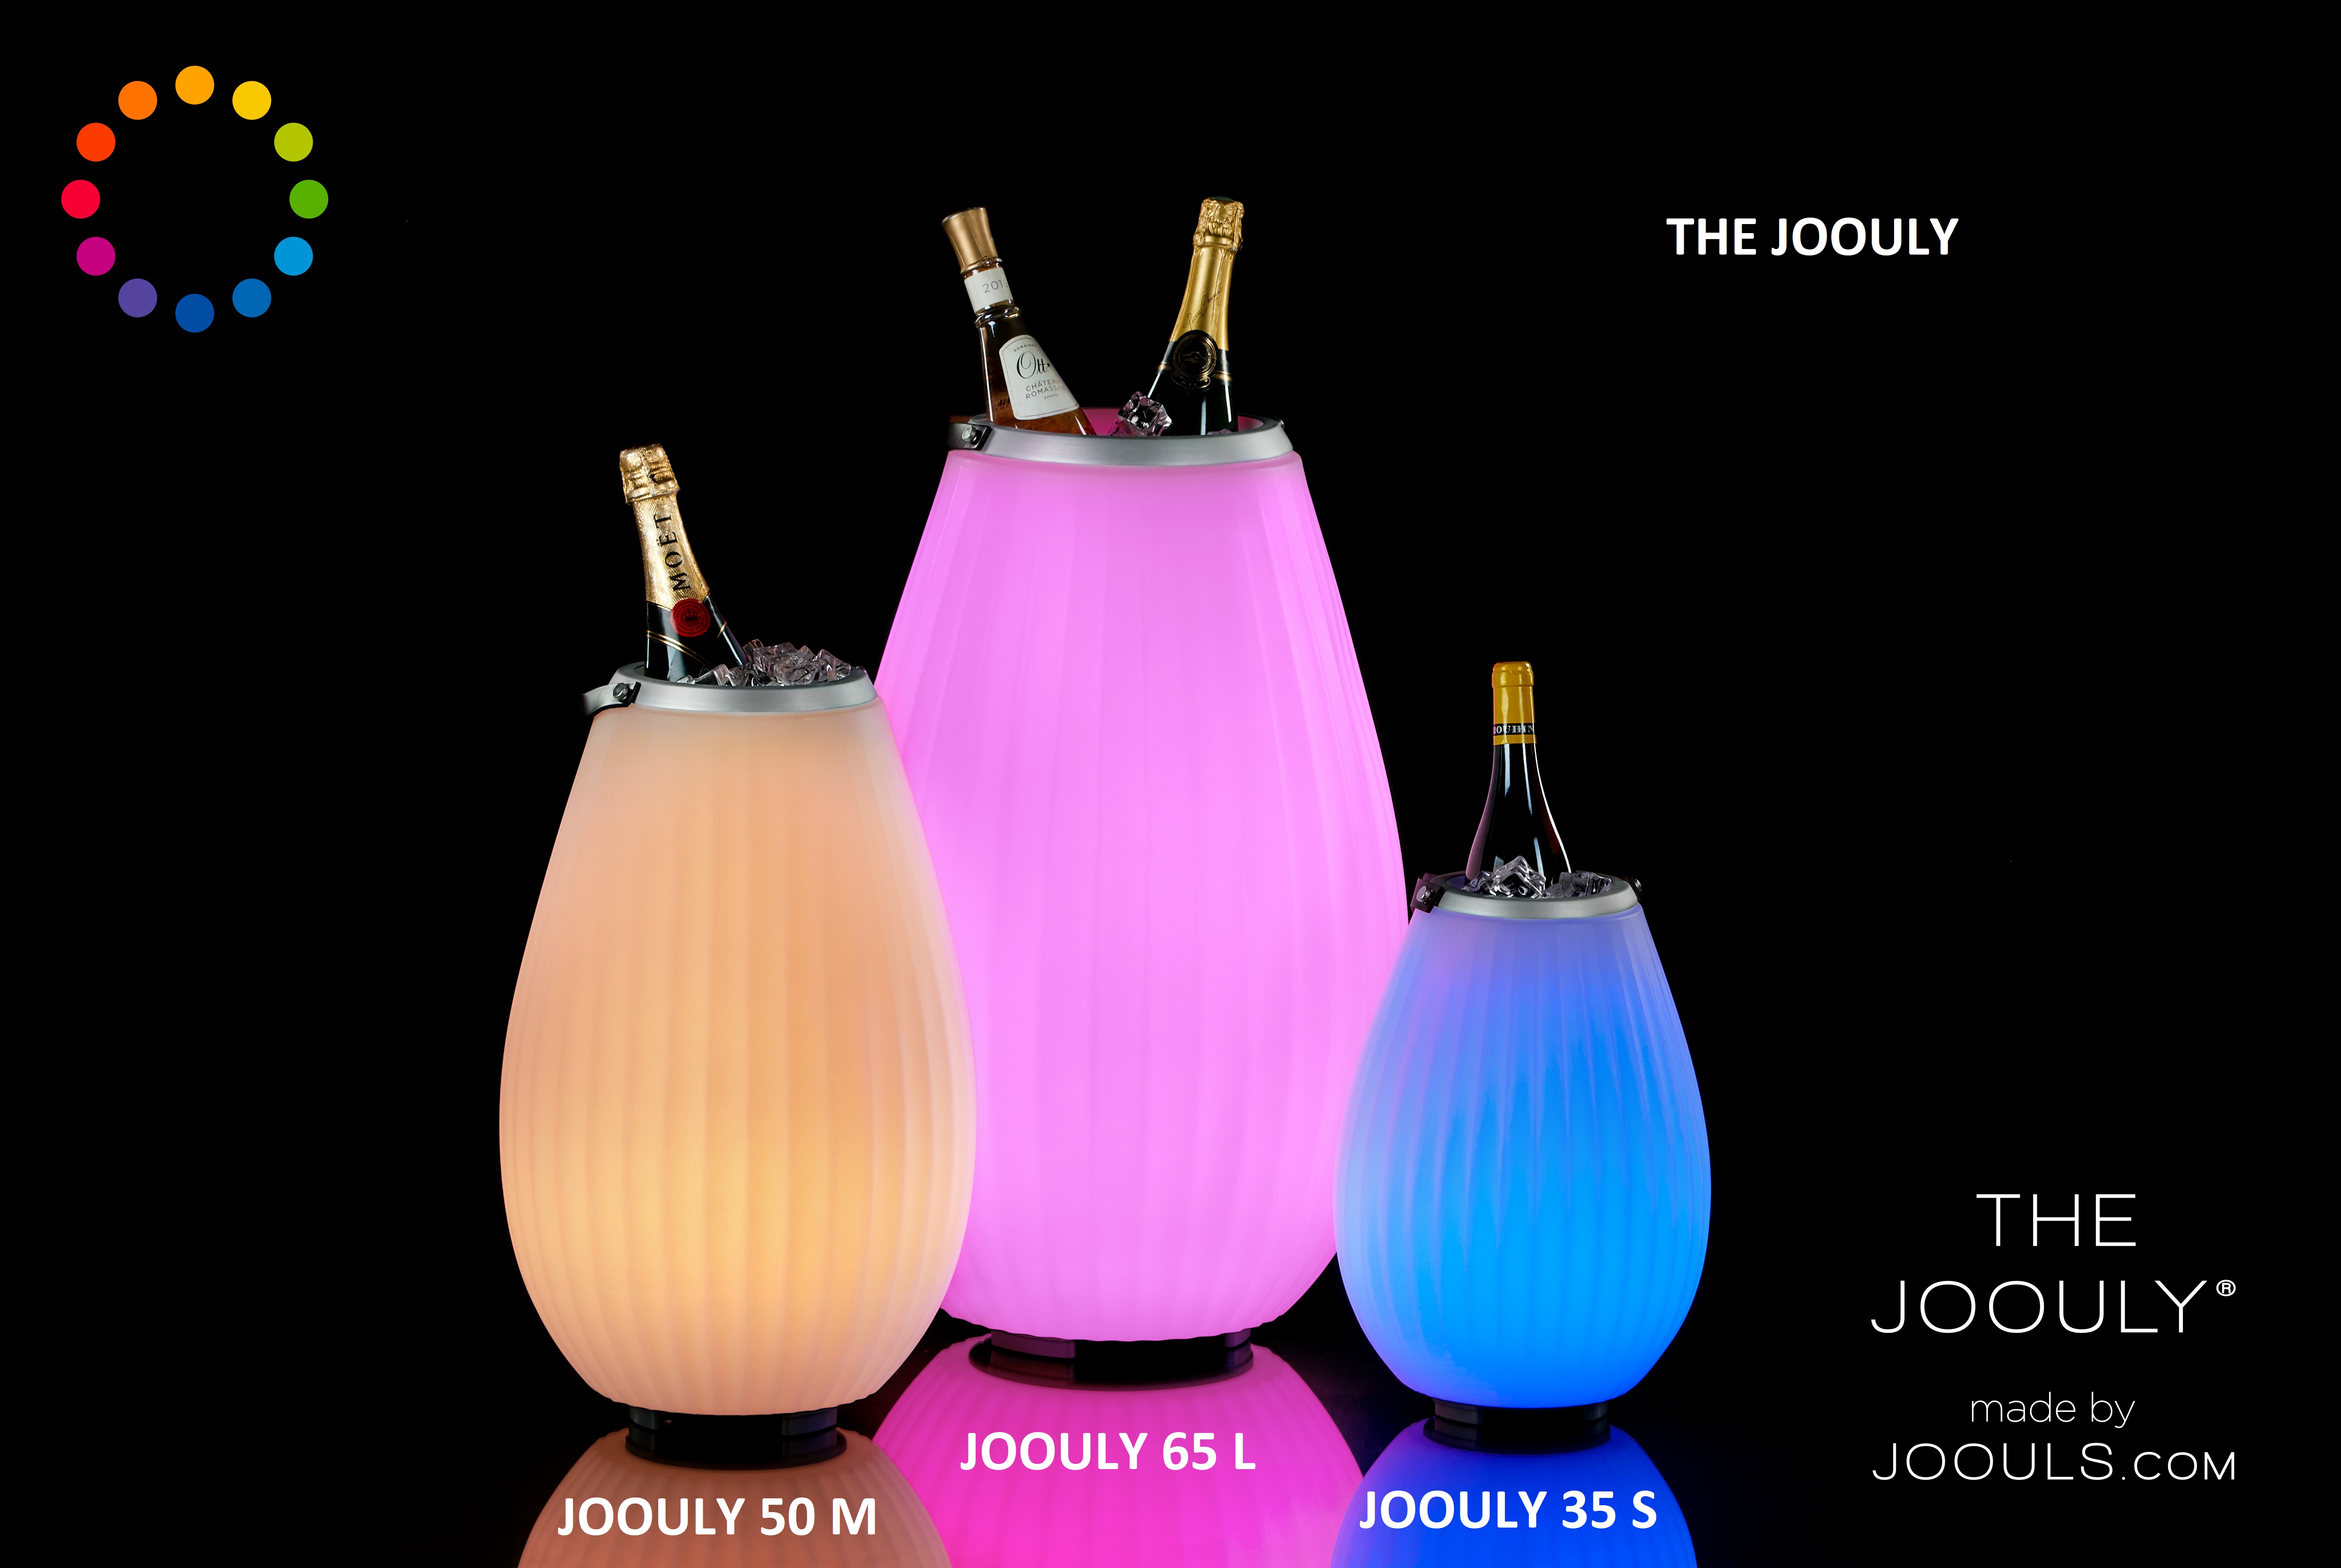 The Joouly 50